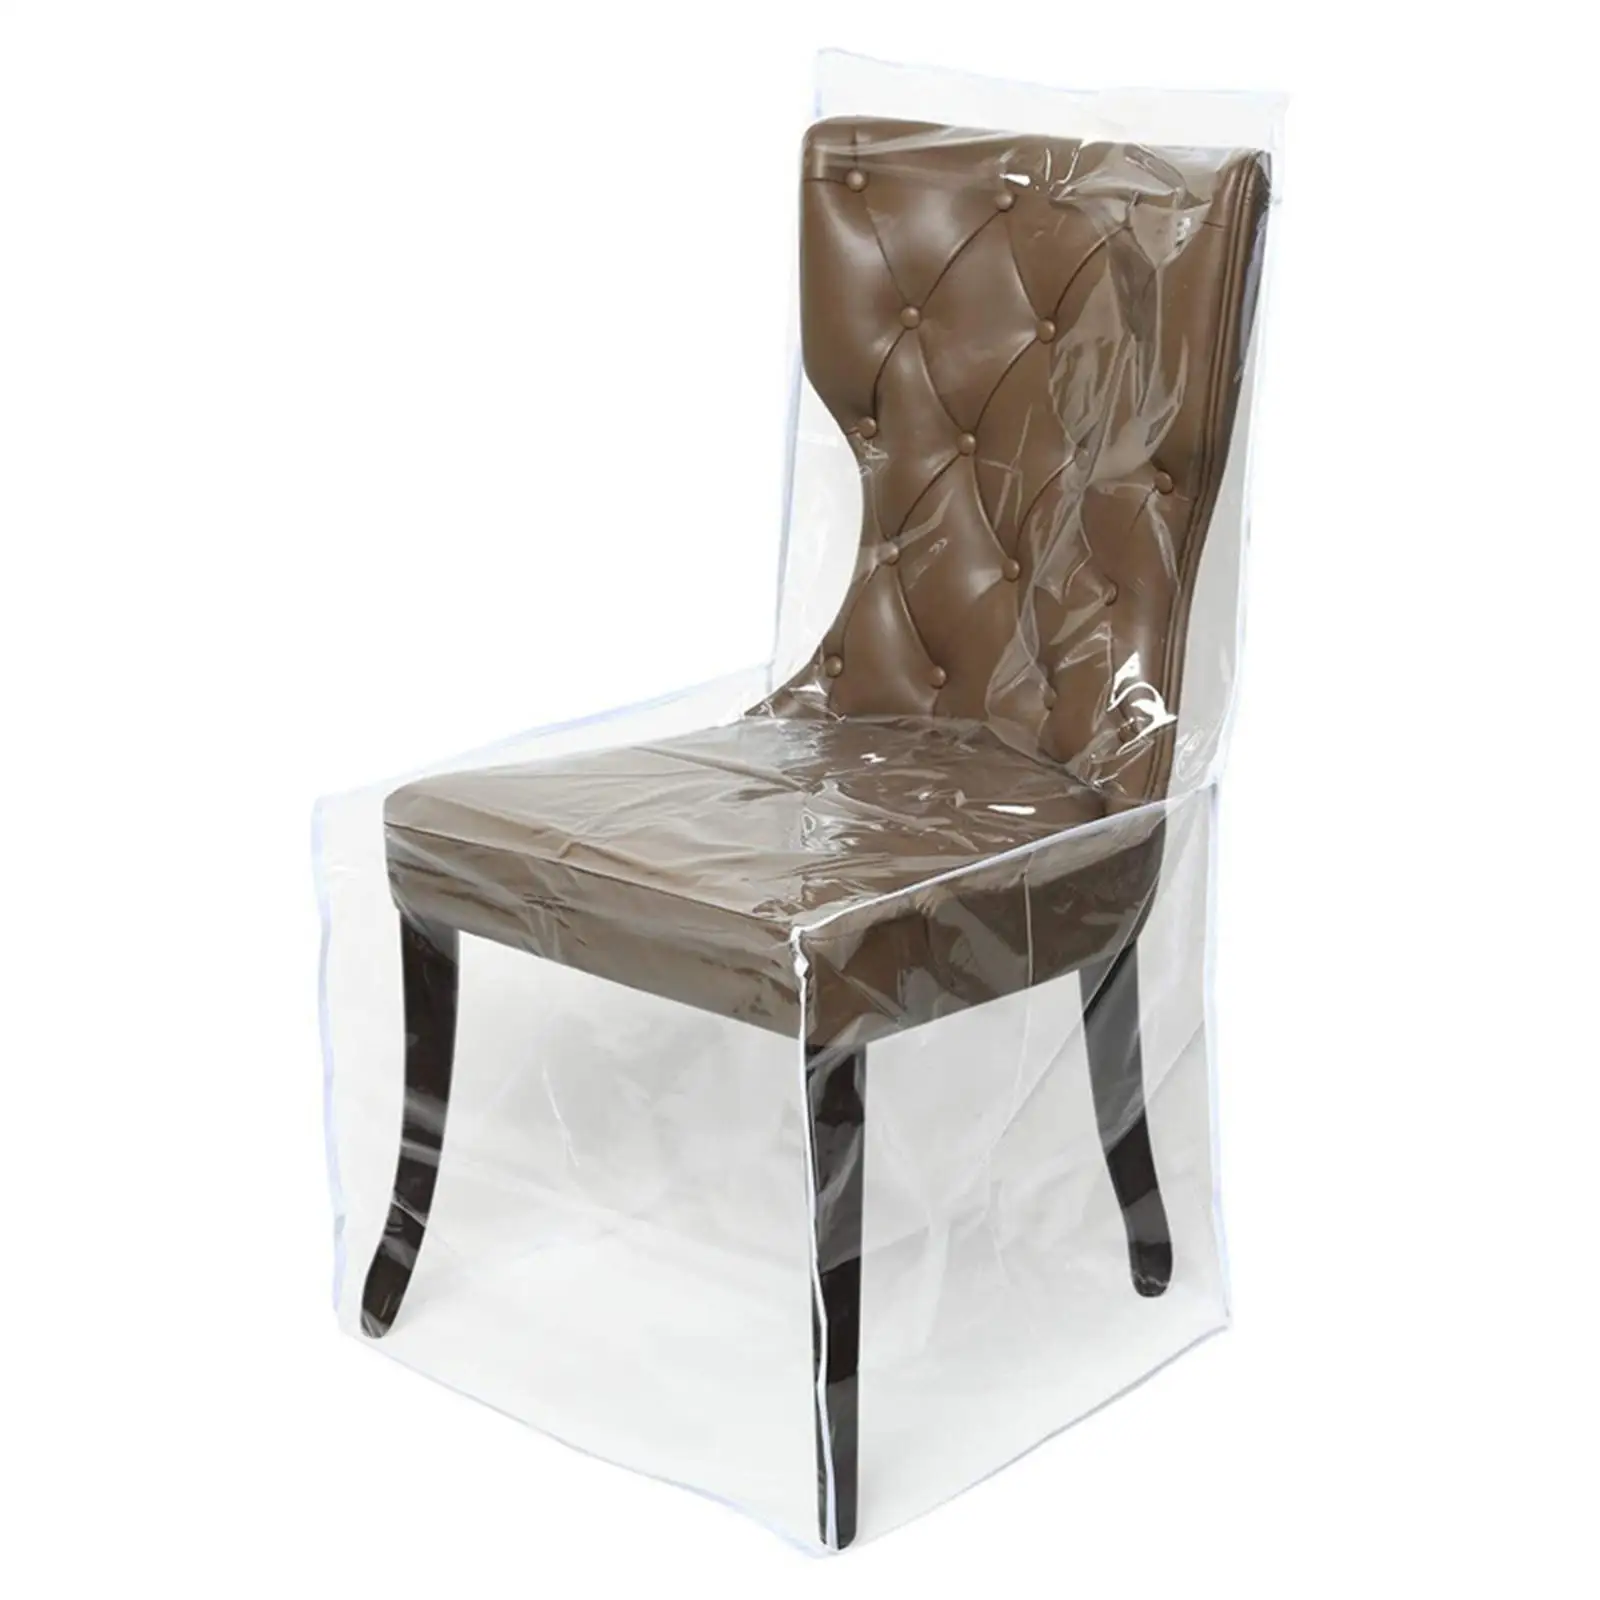 Clear Slipcover Claws Waterproof Chairs Slipcover No Dust No Dining Room Chair Cover PVC Seats Protector